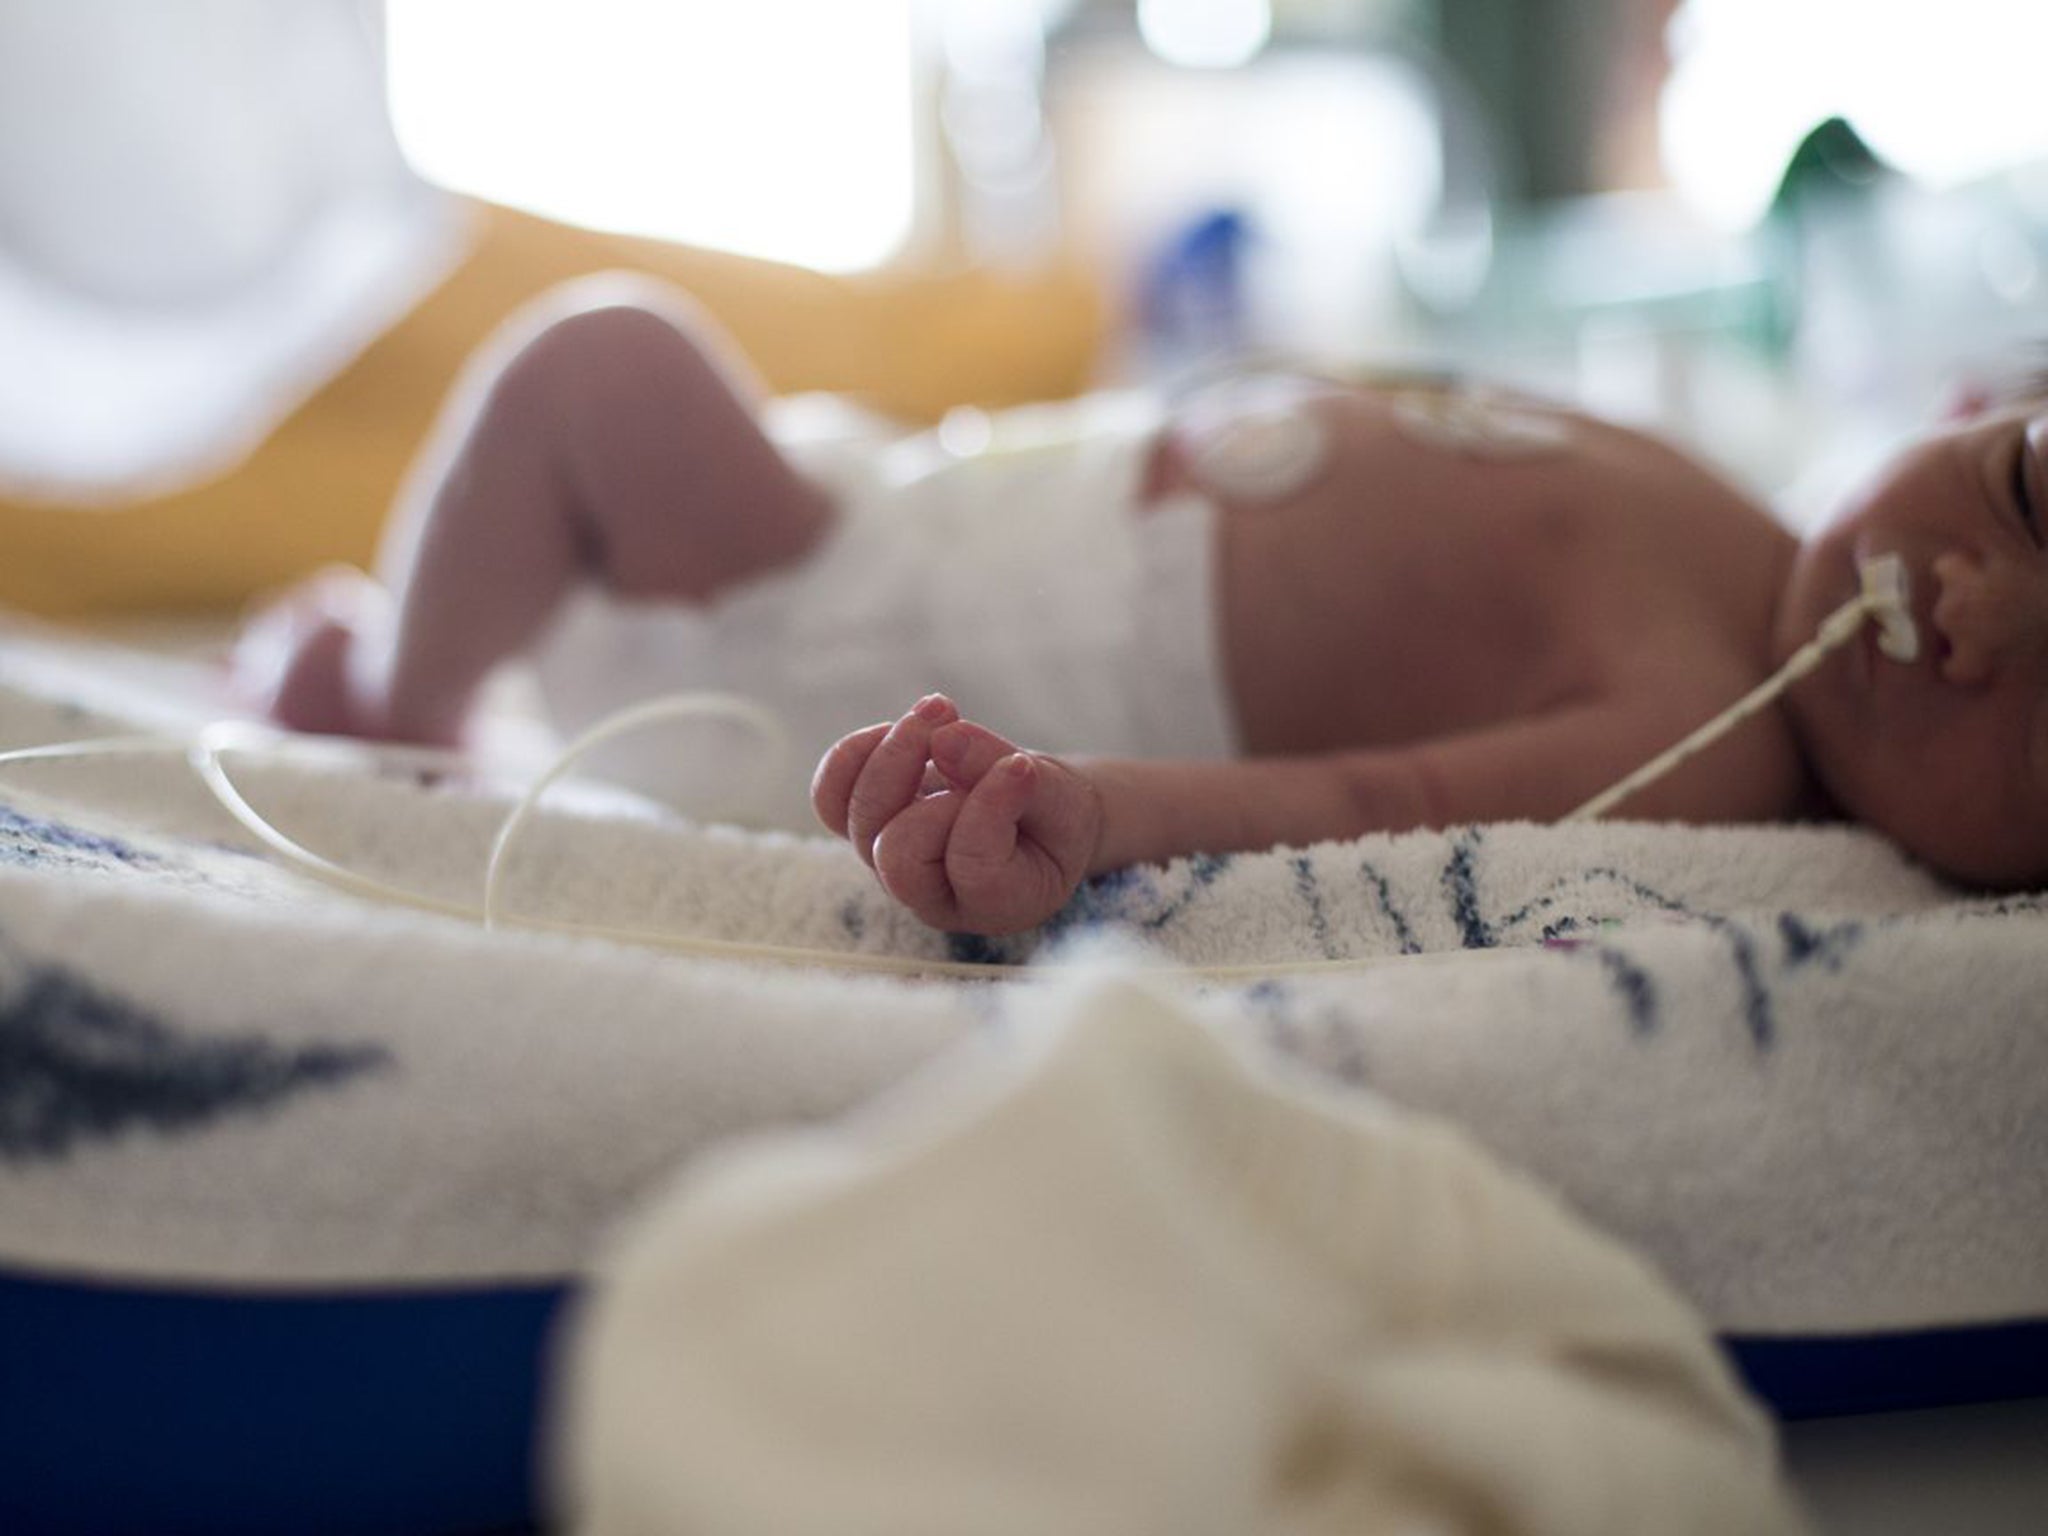 Every year, an estimated 1,951 additional children die in the UK